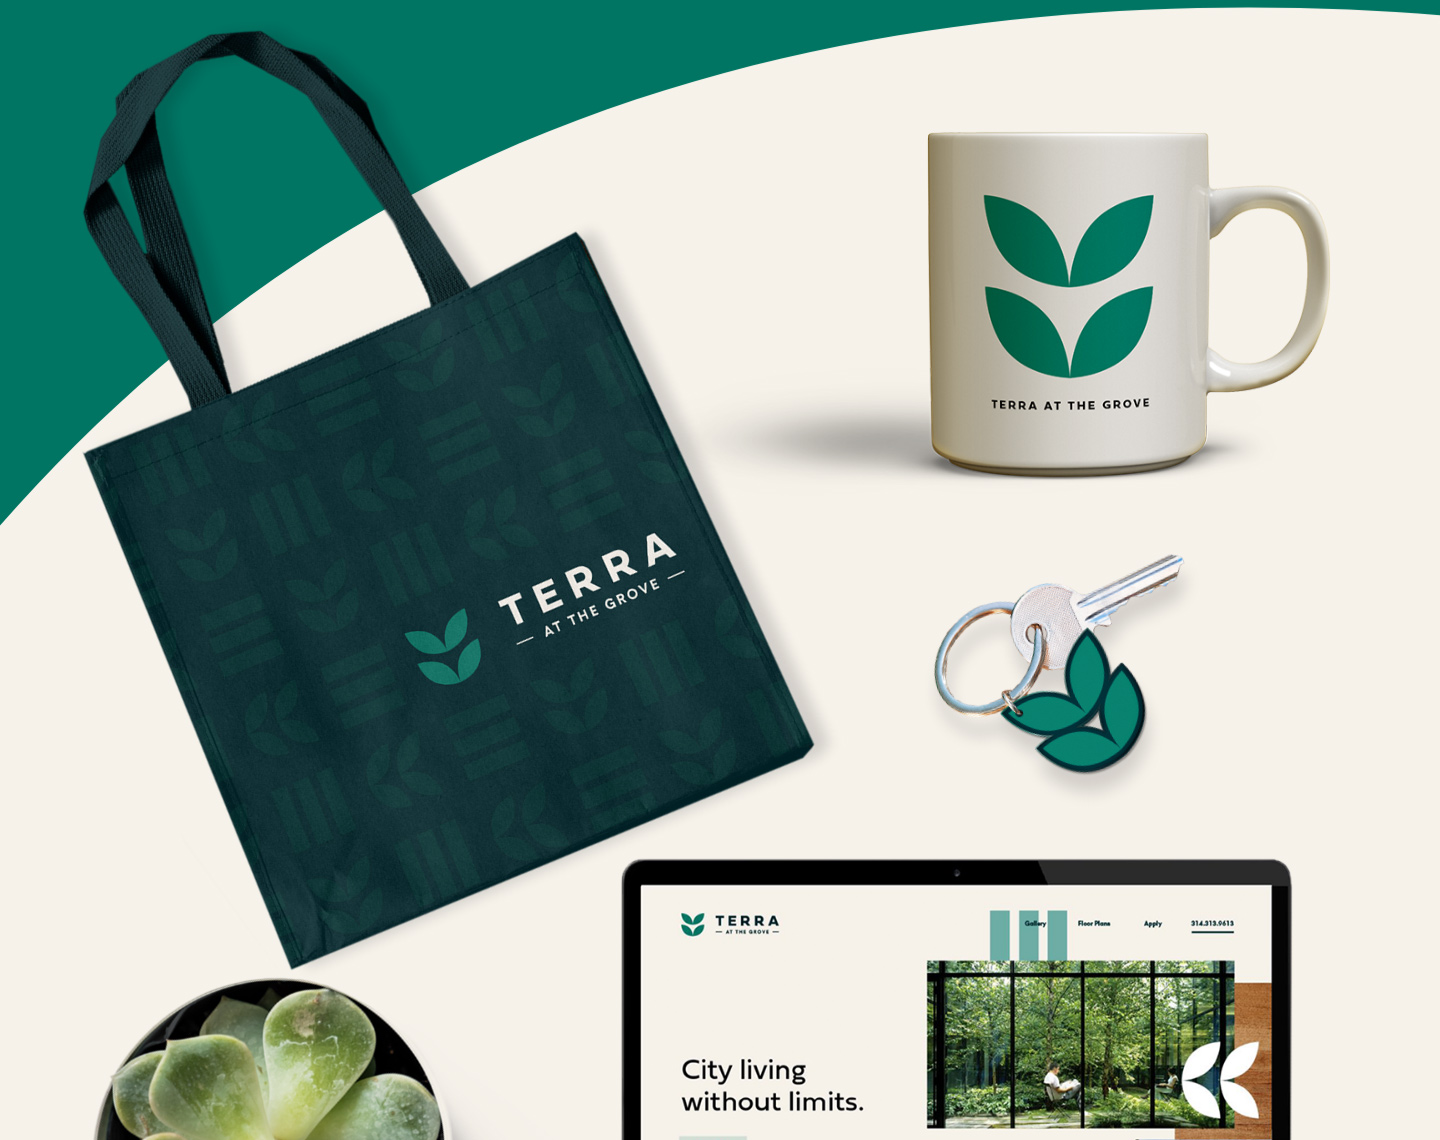 A tote bag, coffee mug and keychain with the Terra branding show how the brand can live in various creative expressions